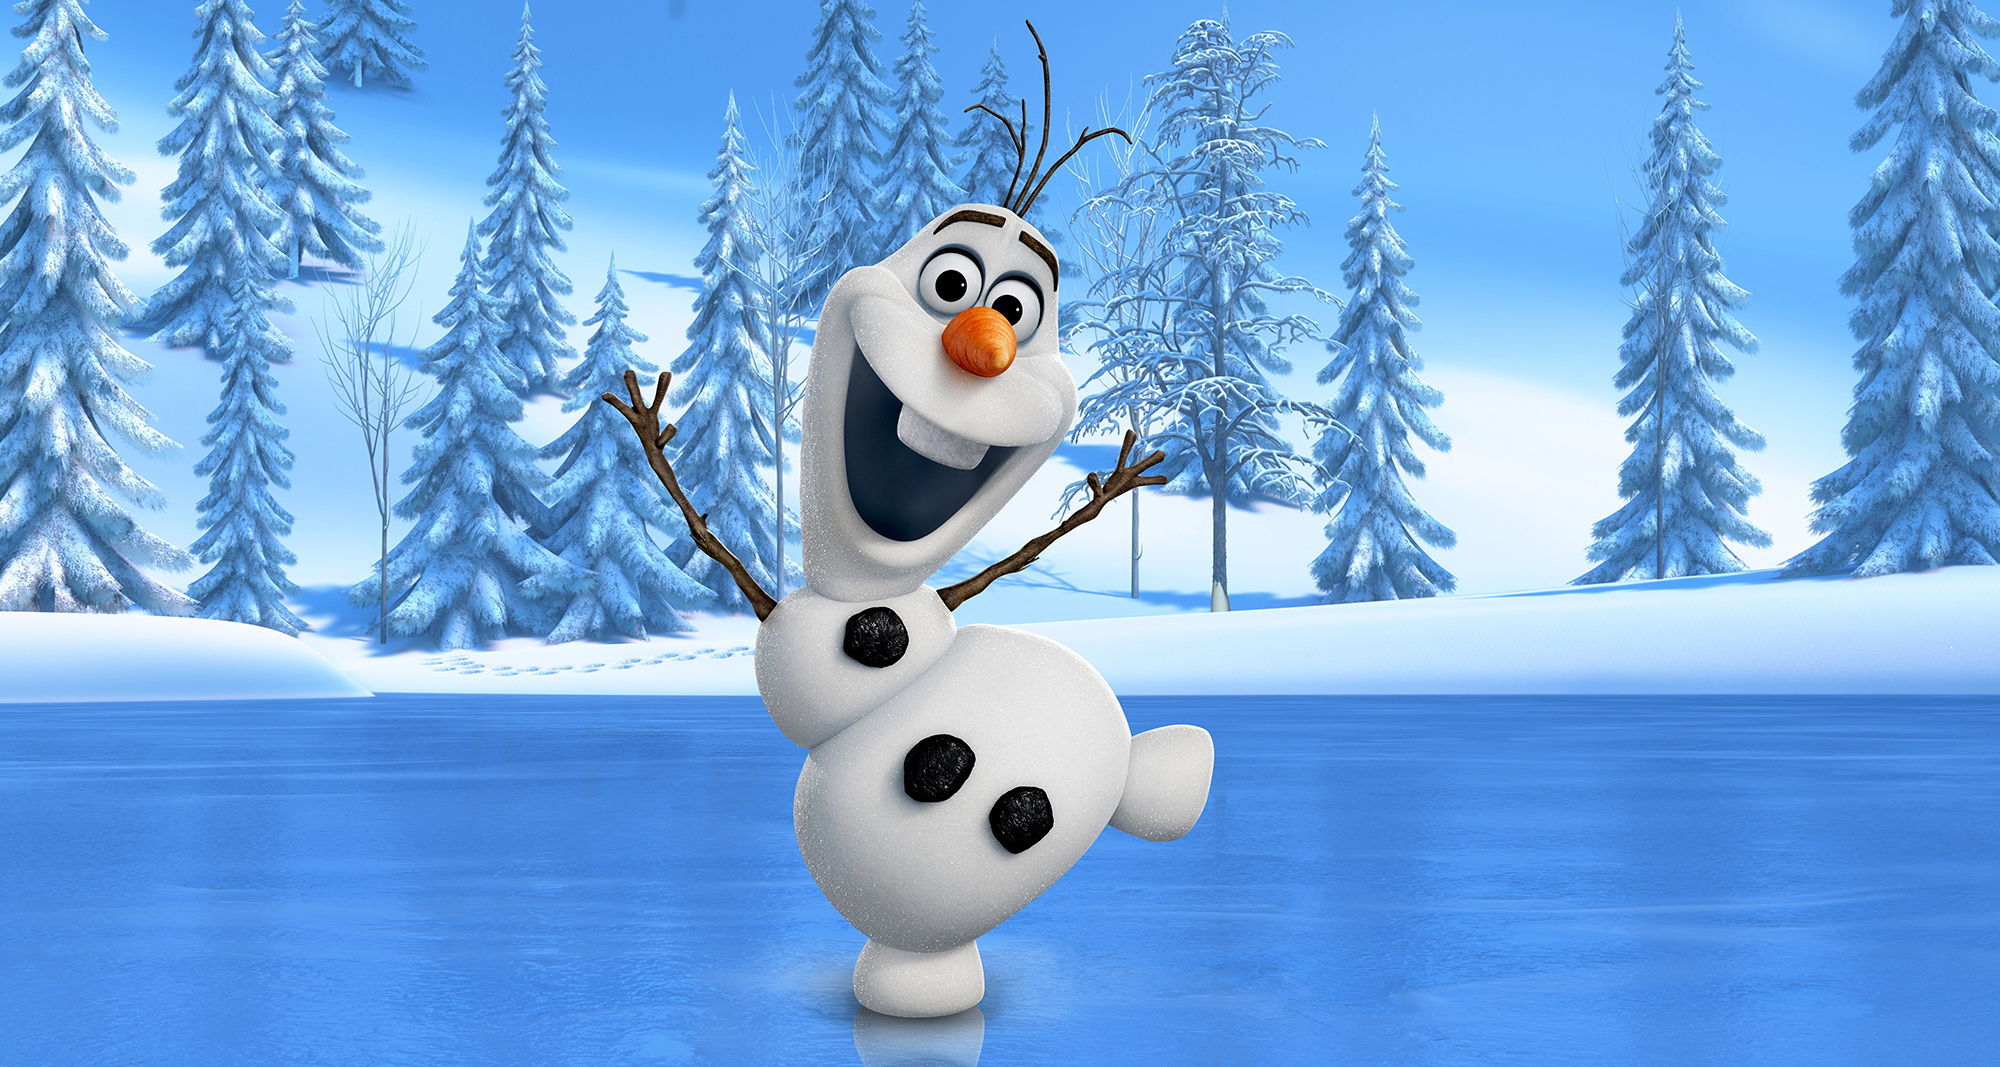 Detail Image Of Olaf From Frozen Nomer 5